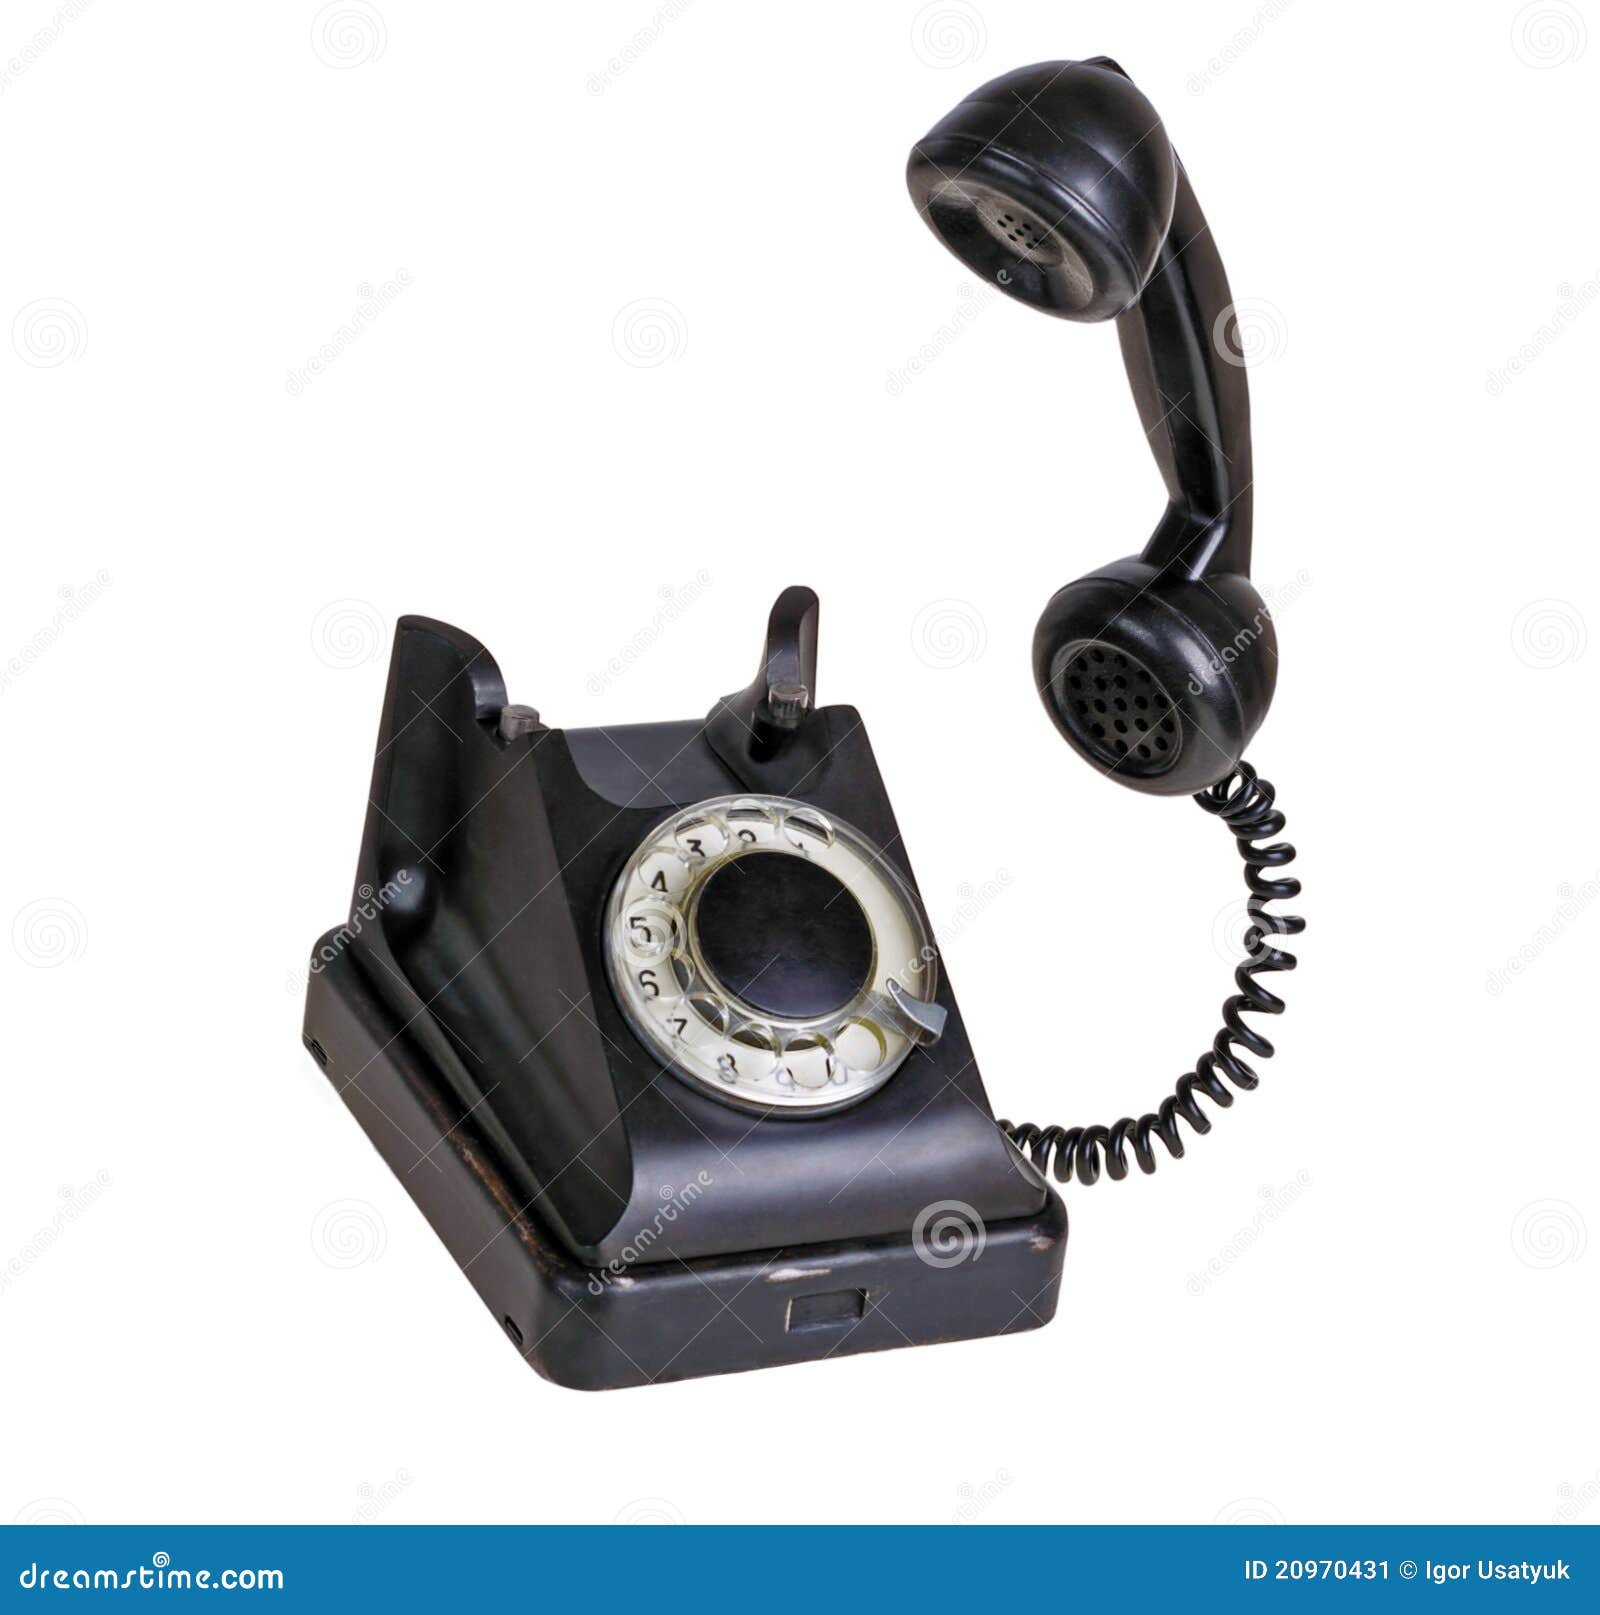 hook up cell phone to landline